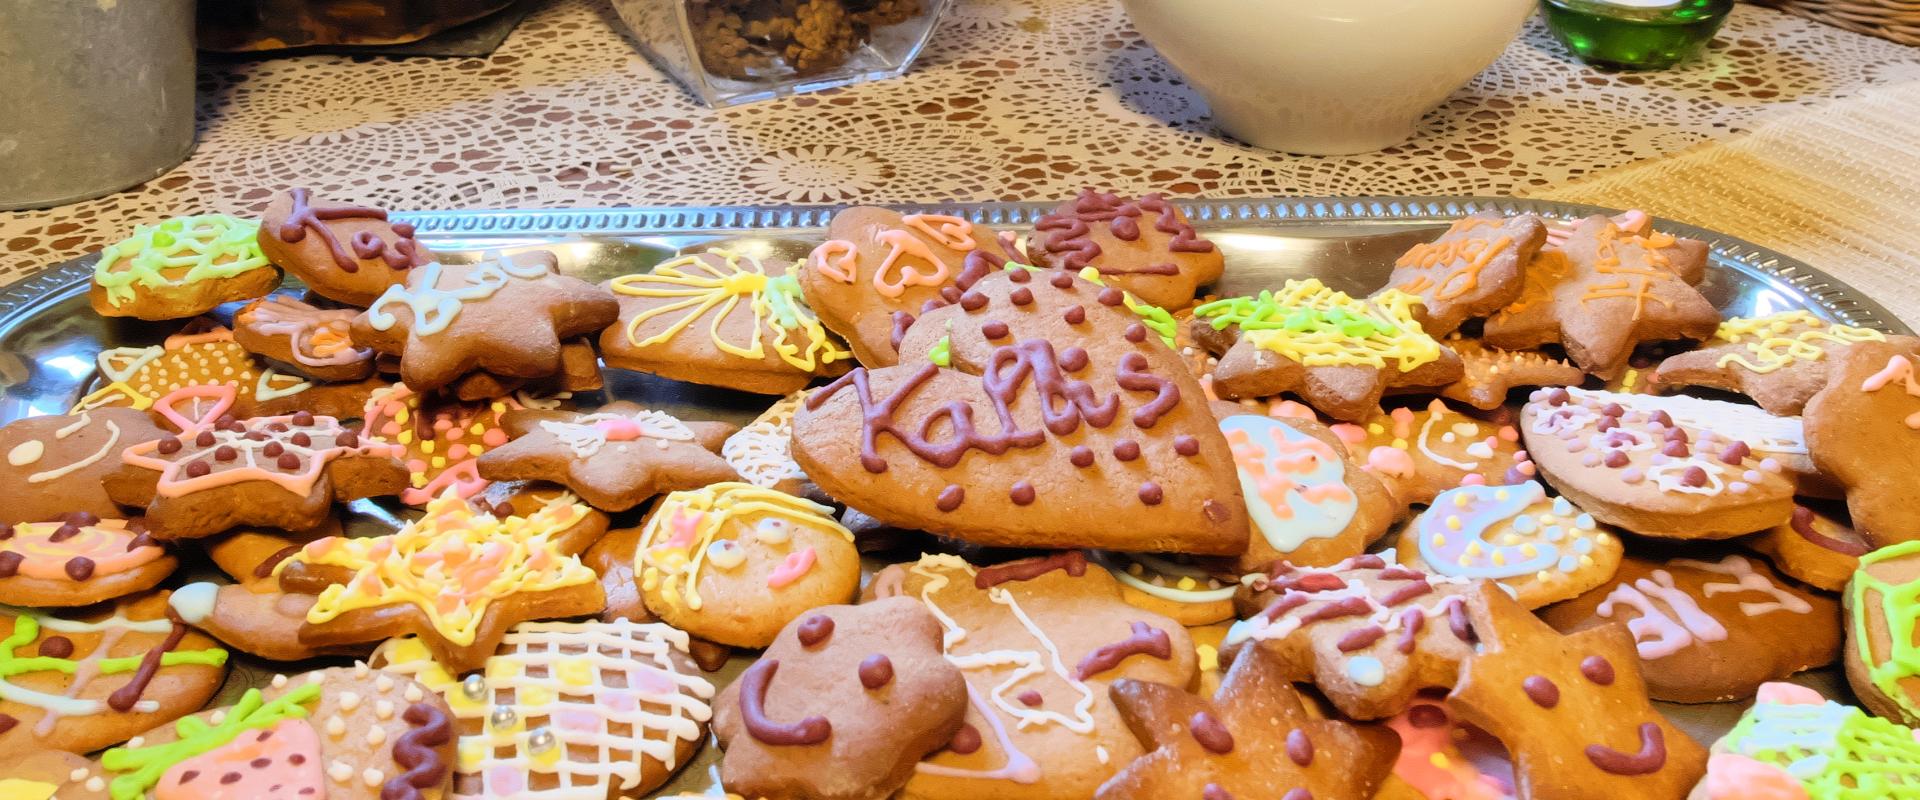 Workshop for decorating gingerbread/cookies and making Kalju-Lava chocolate